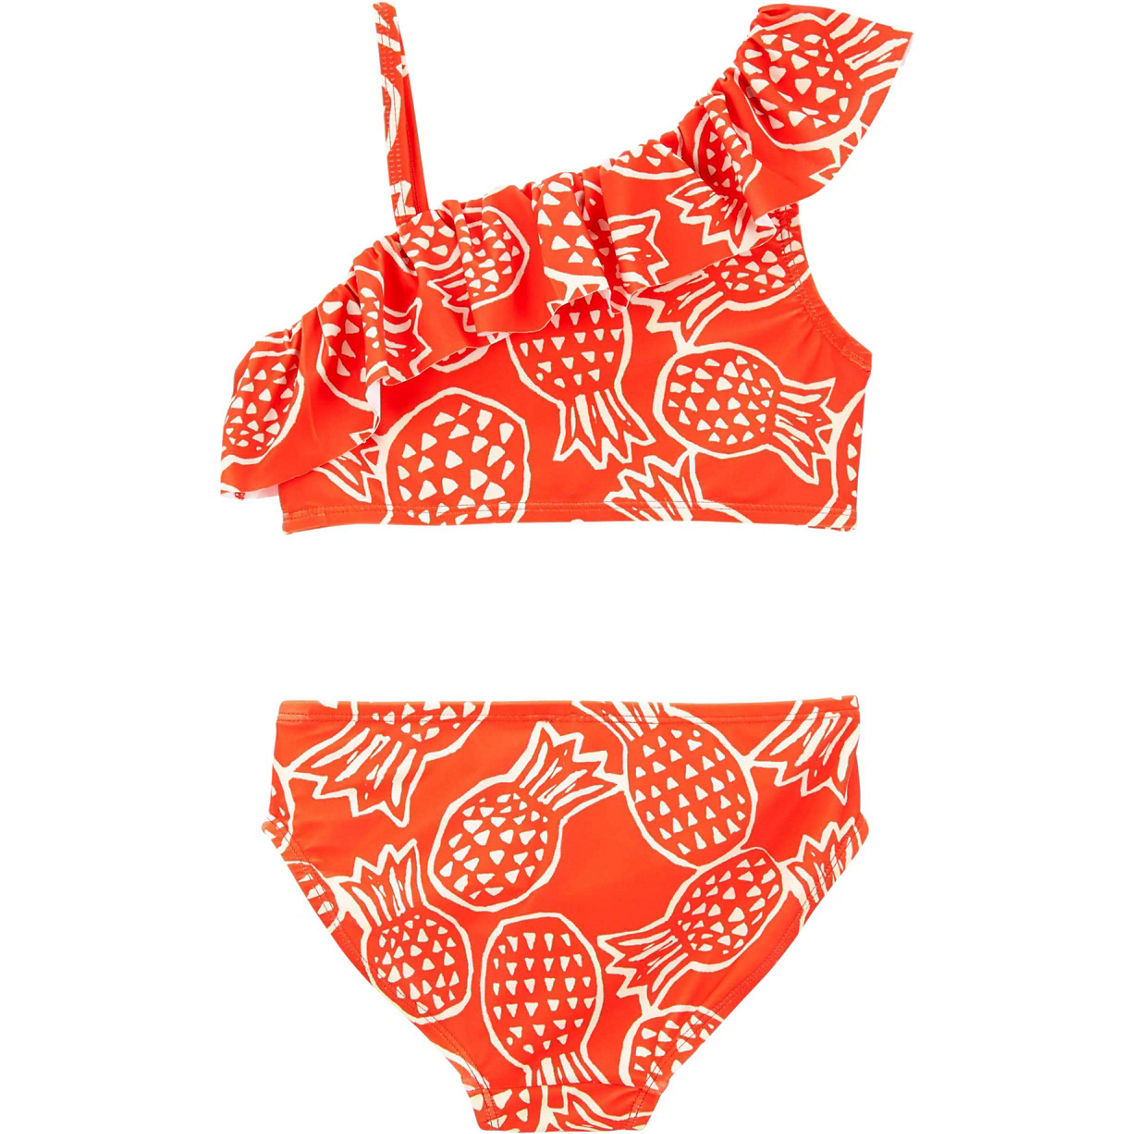 Carter's Little Girls One Shoulder Pineapple Tankini Top and Bottoms 2 pc. Swim Set - Image 2 of 3